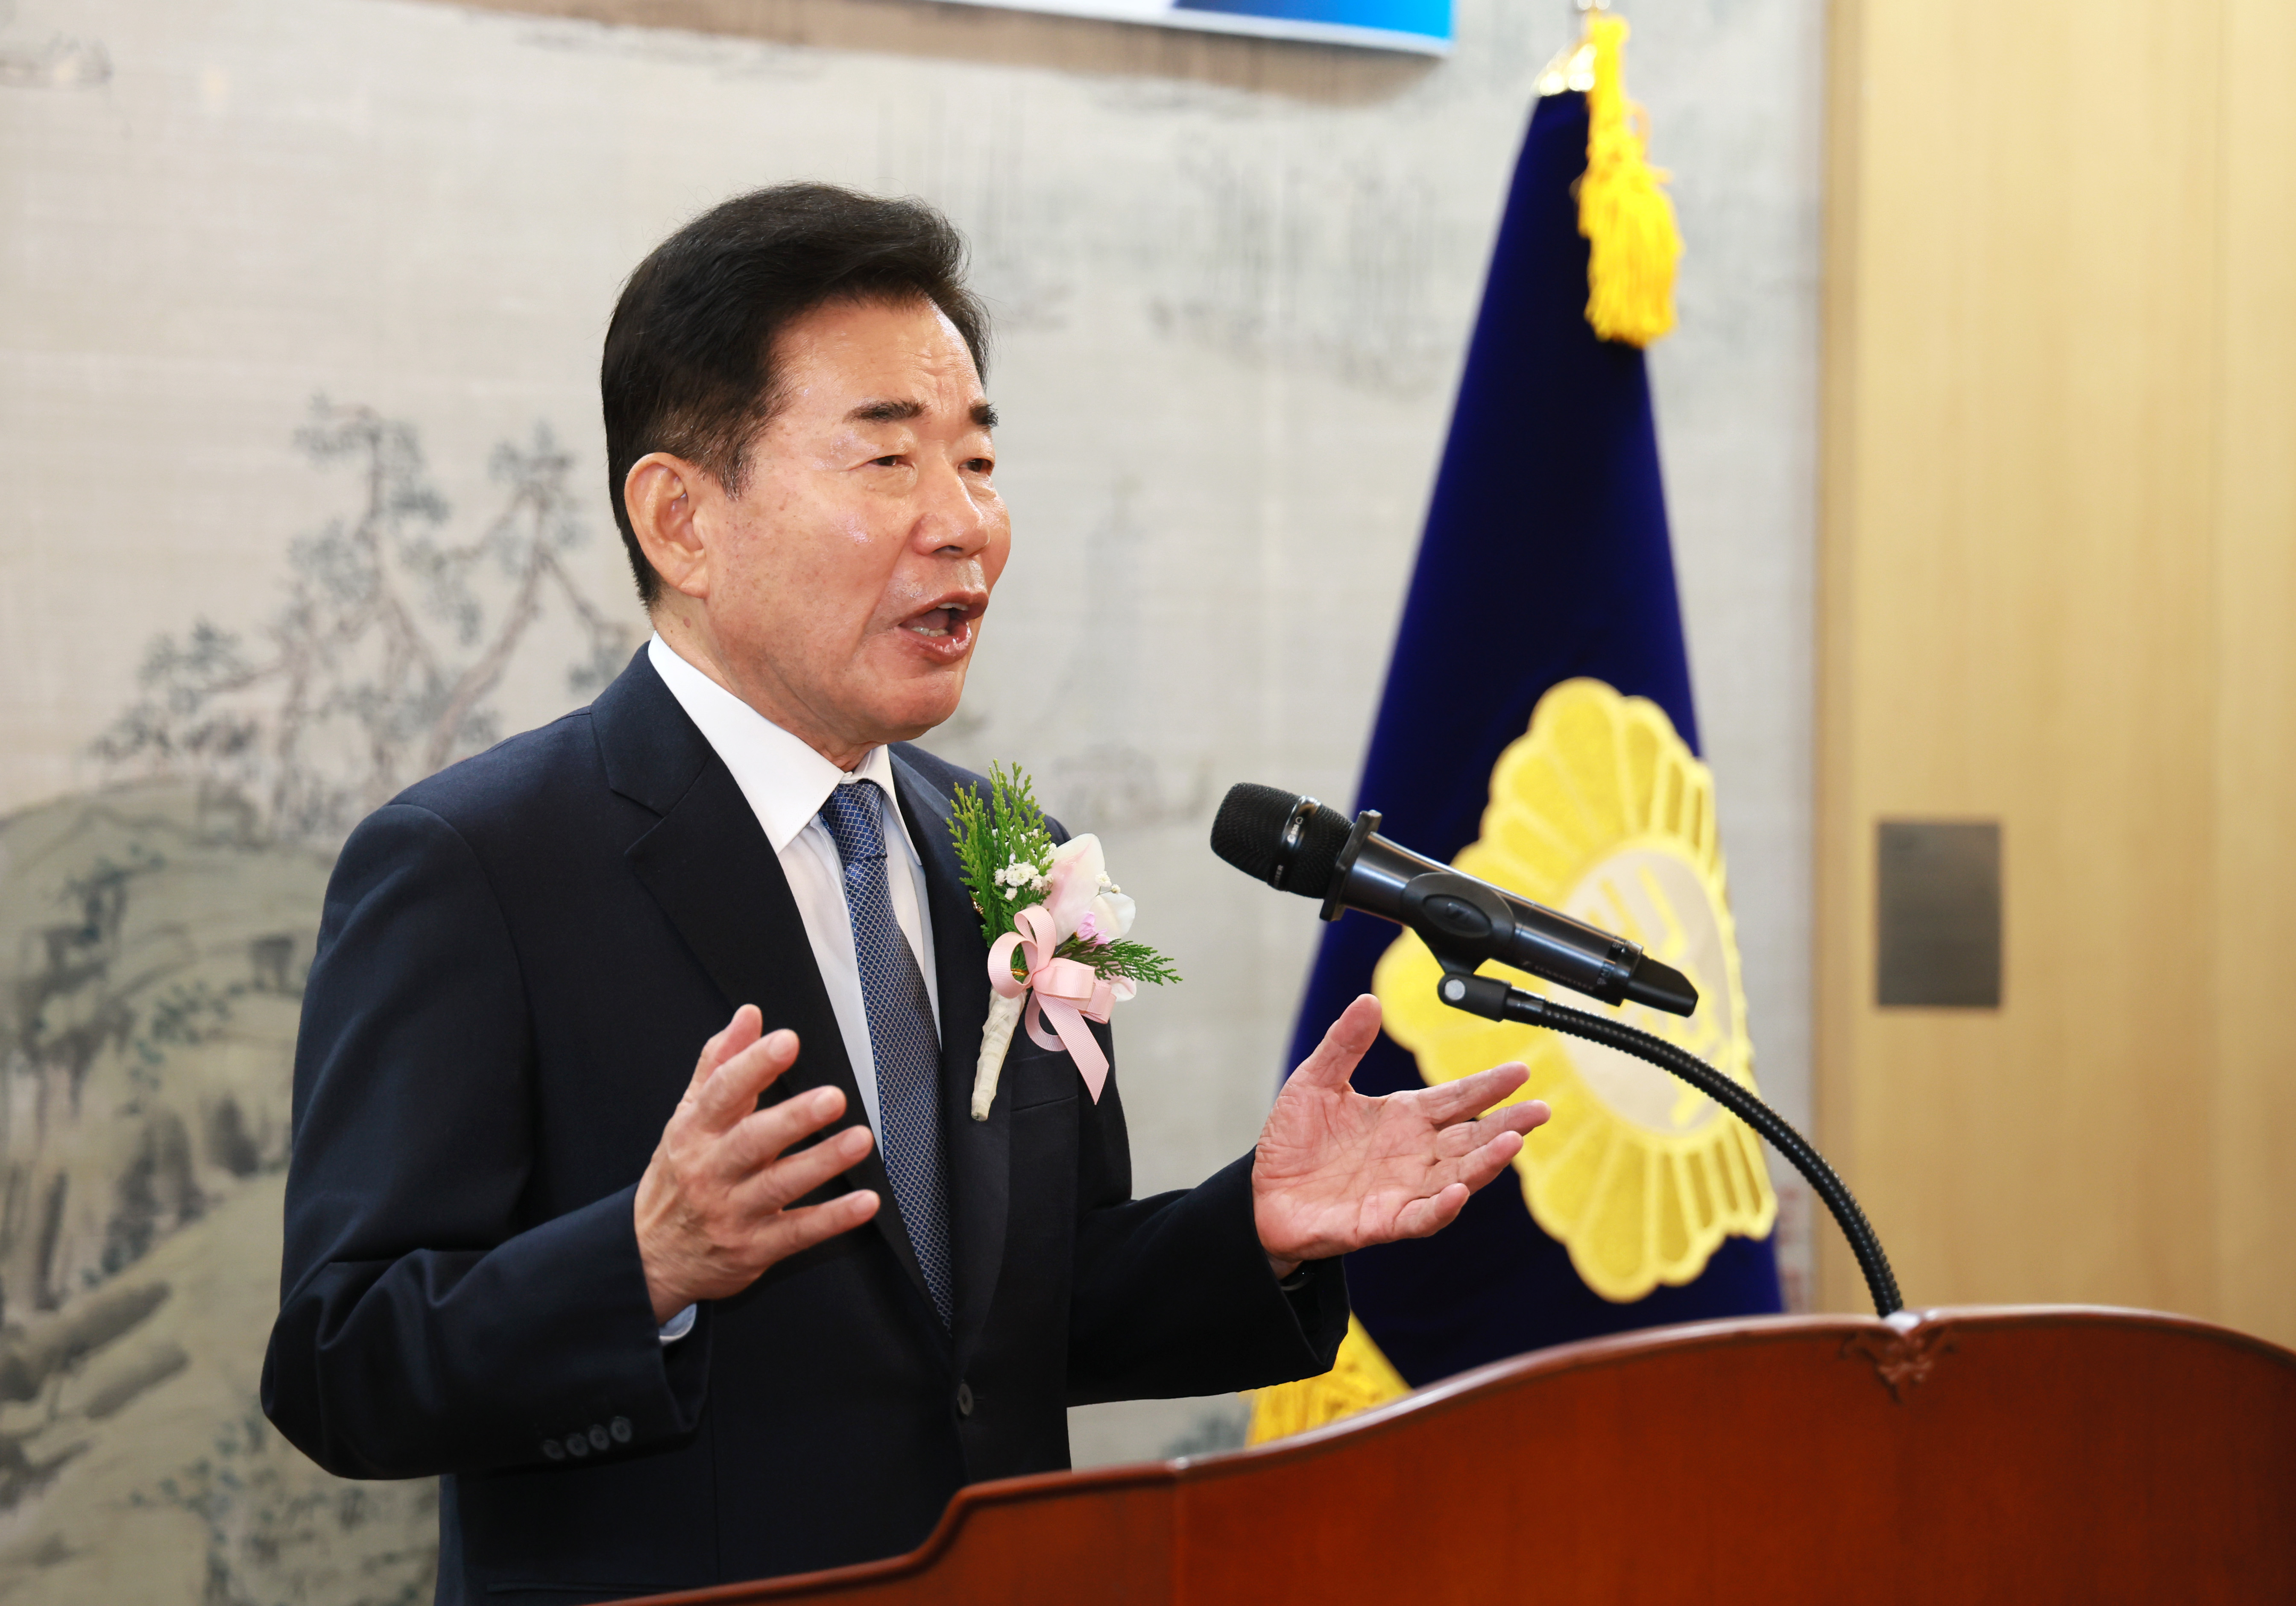 Speaker attends Assembly&rsquo;s New Year kick-off ceremony 관련사진 2 보기